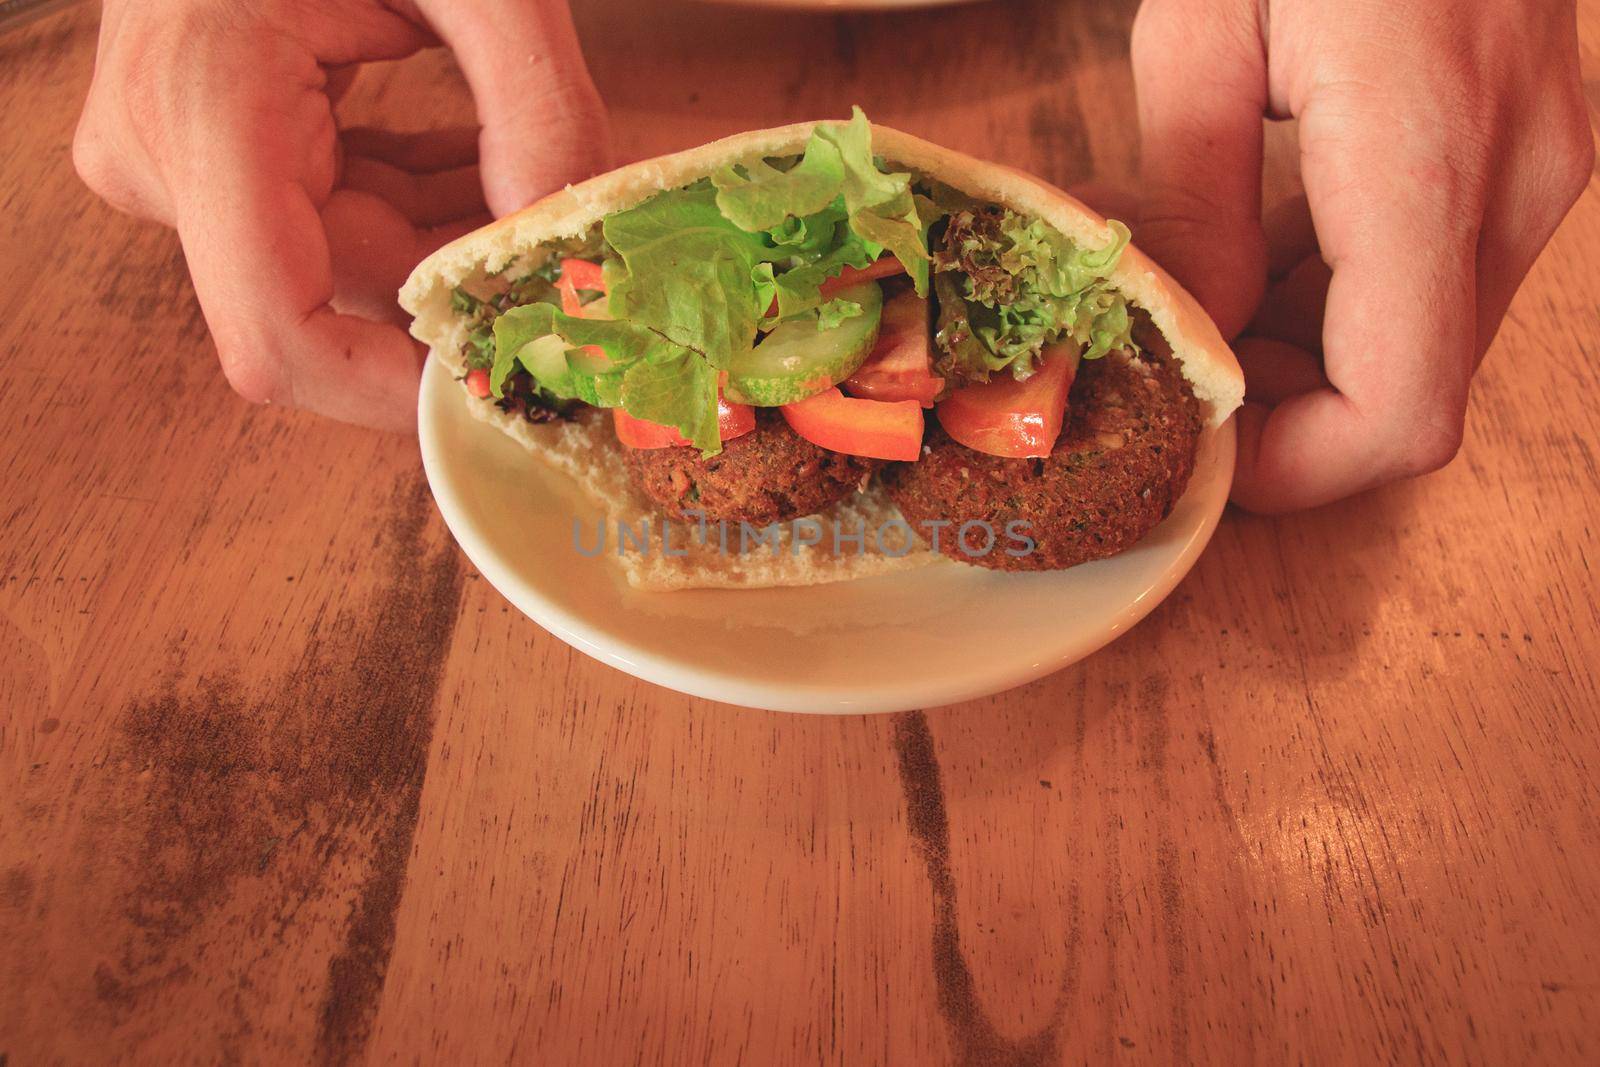 A serving of pita bread stuffed with falafel and fresh vegetable salad by Sonnet15